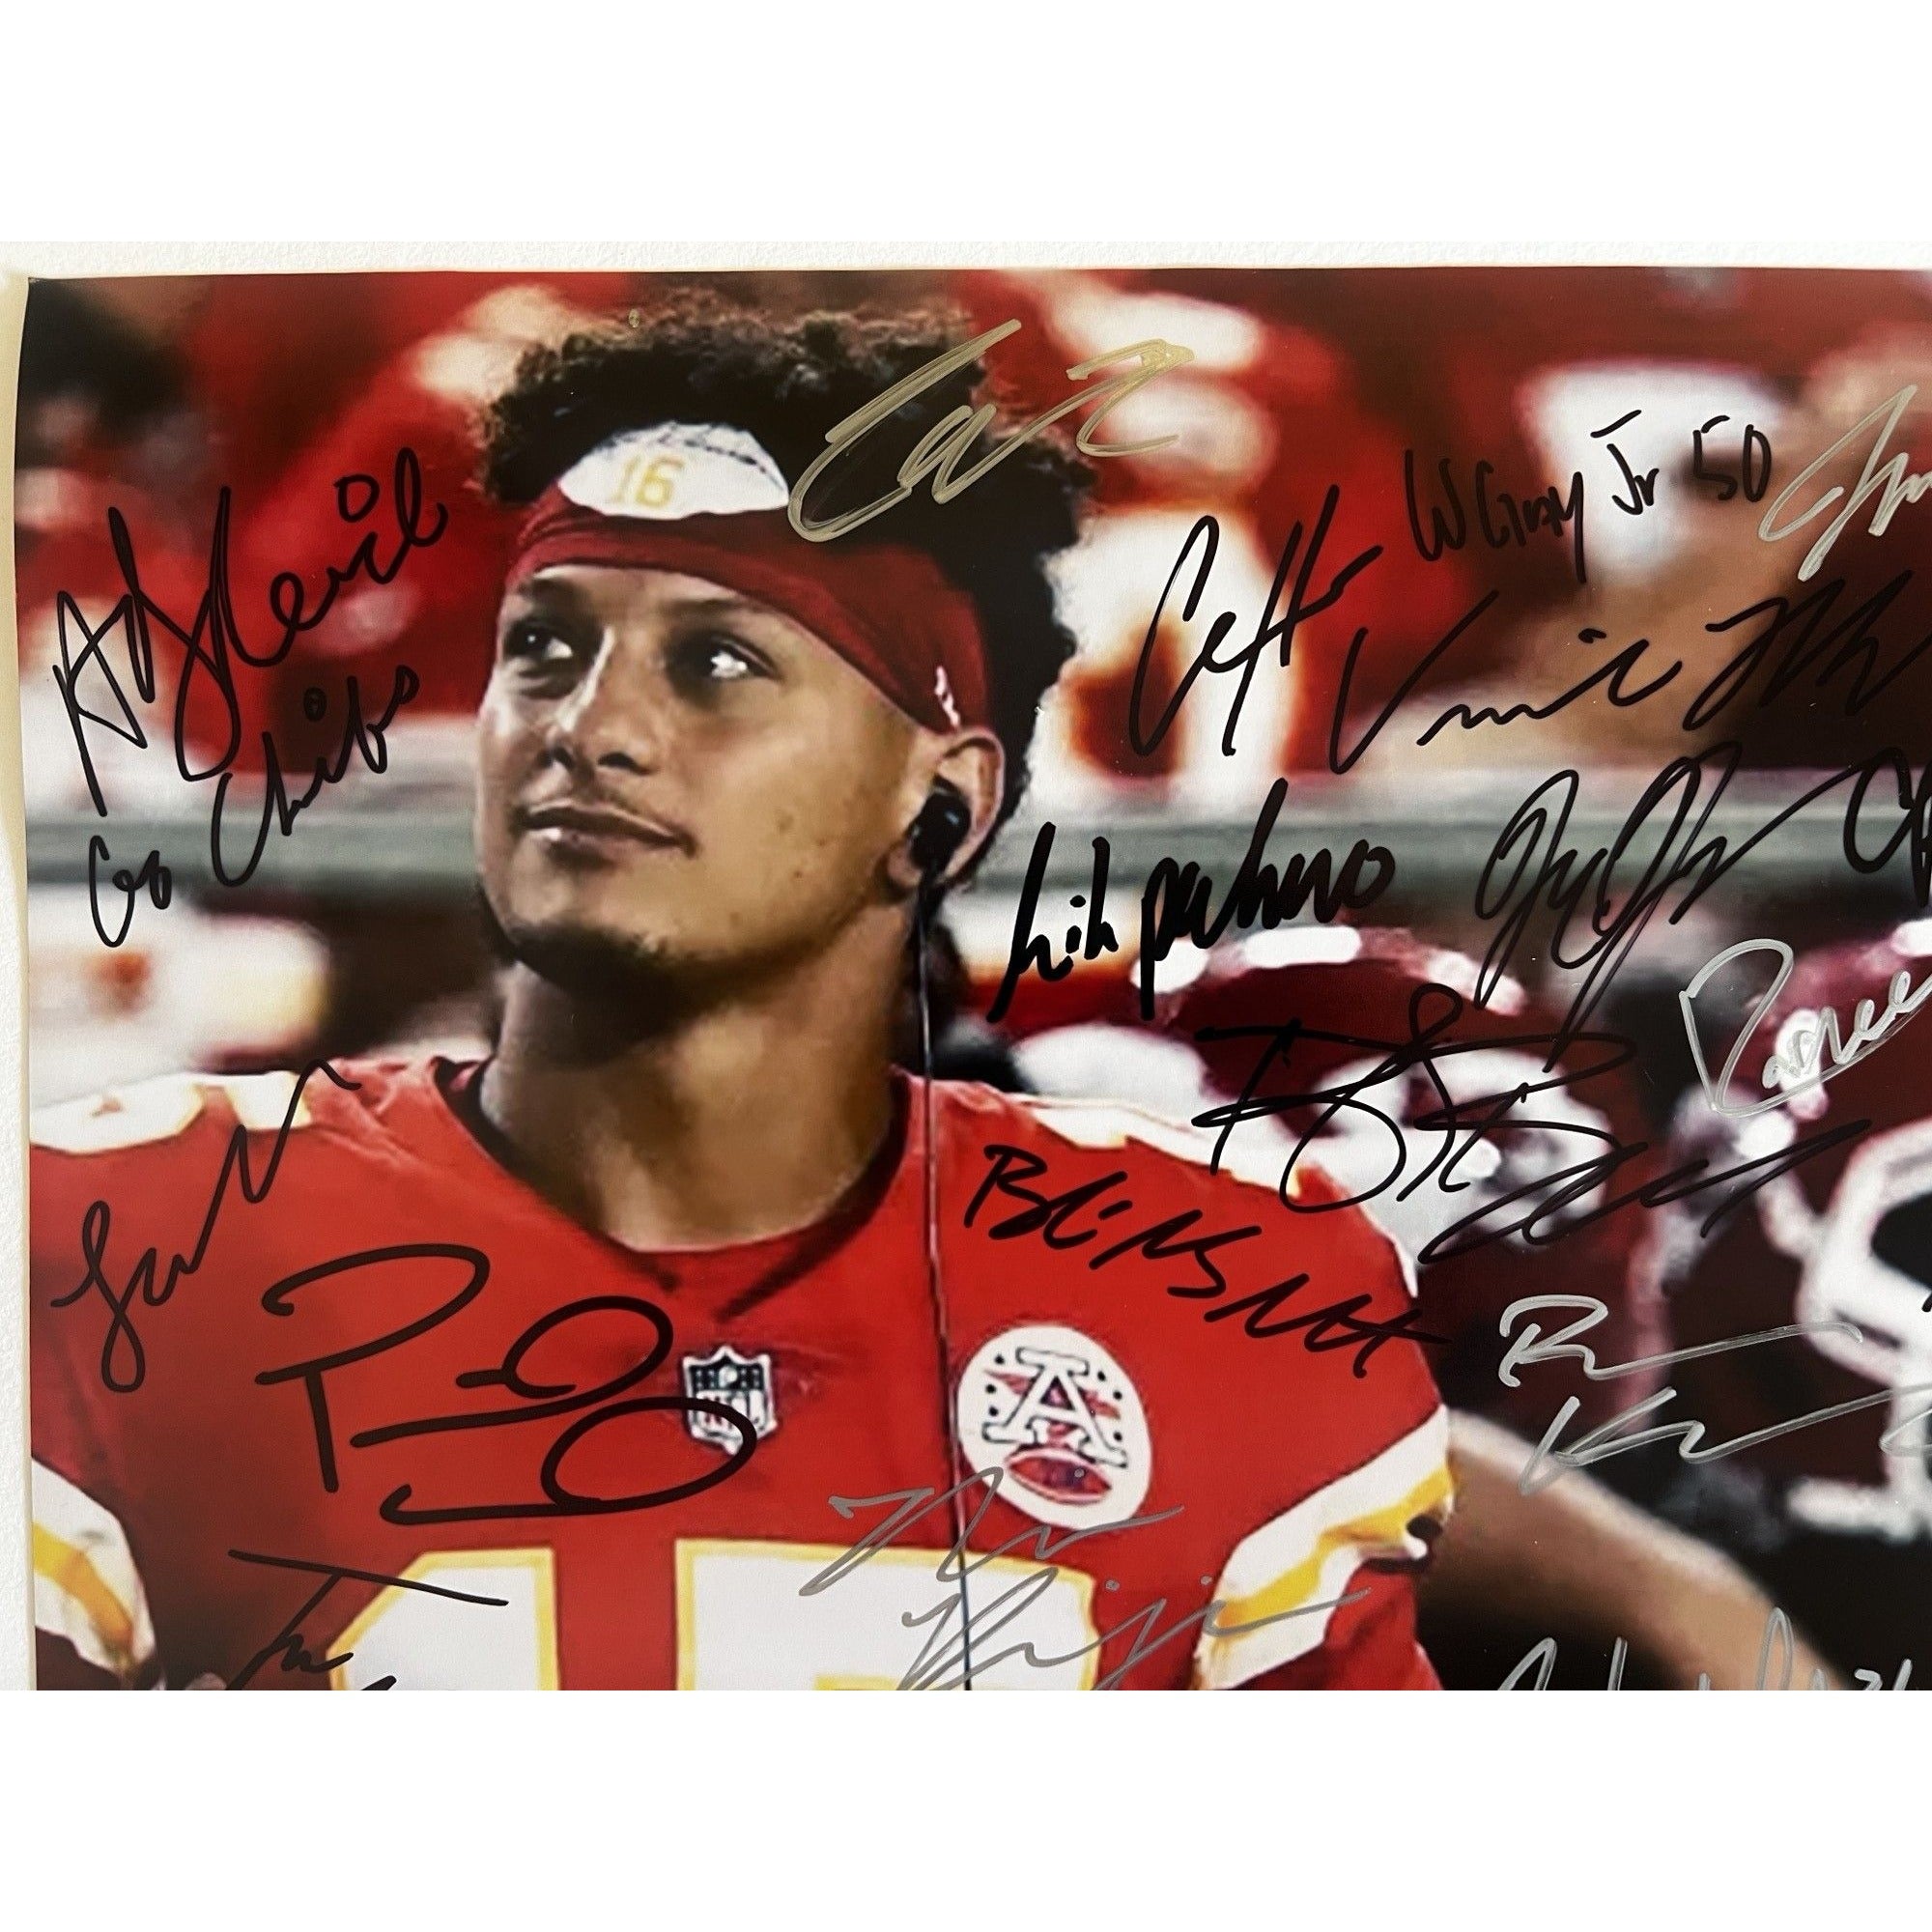 Kansas City Chiefs  2023-24 Patrick Mahomes Travis Kelce 40 plus sigs Super Bowl Champs team signed 16x20 photo signed  with proof